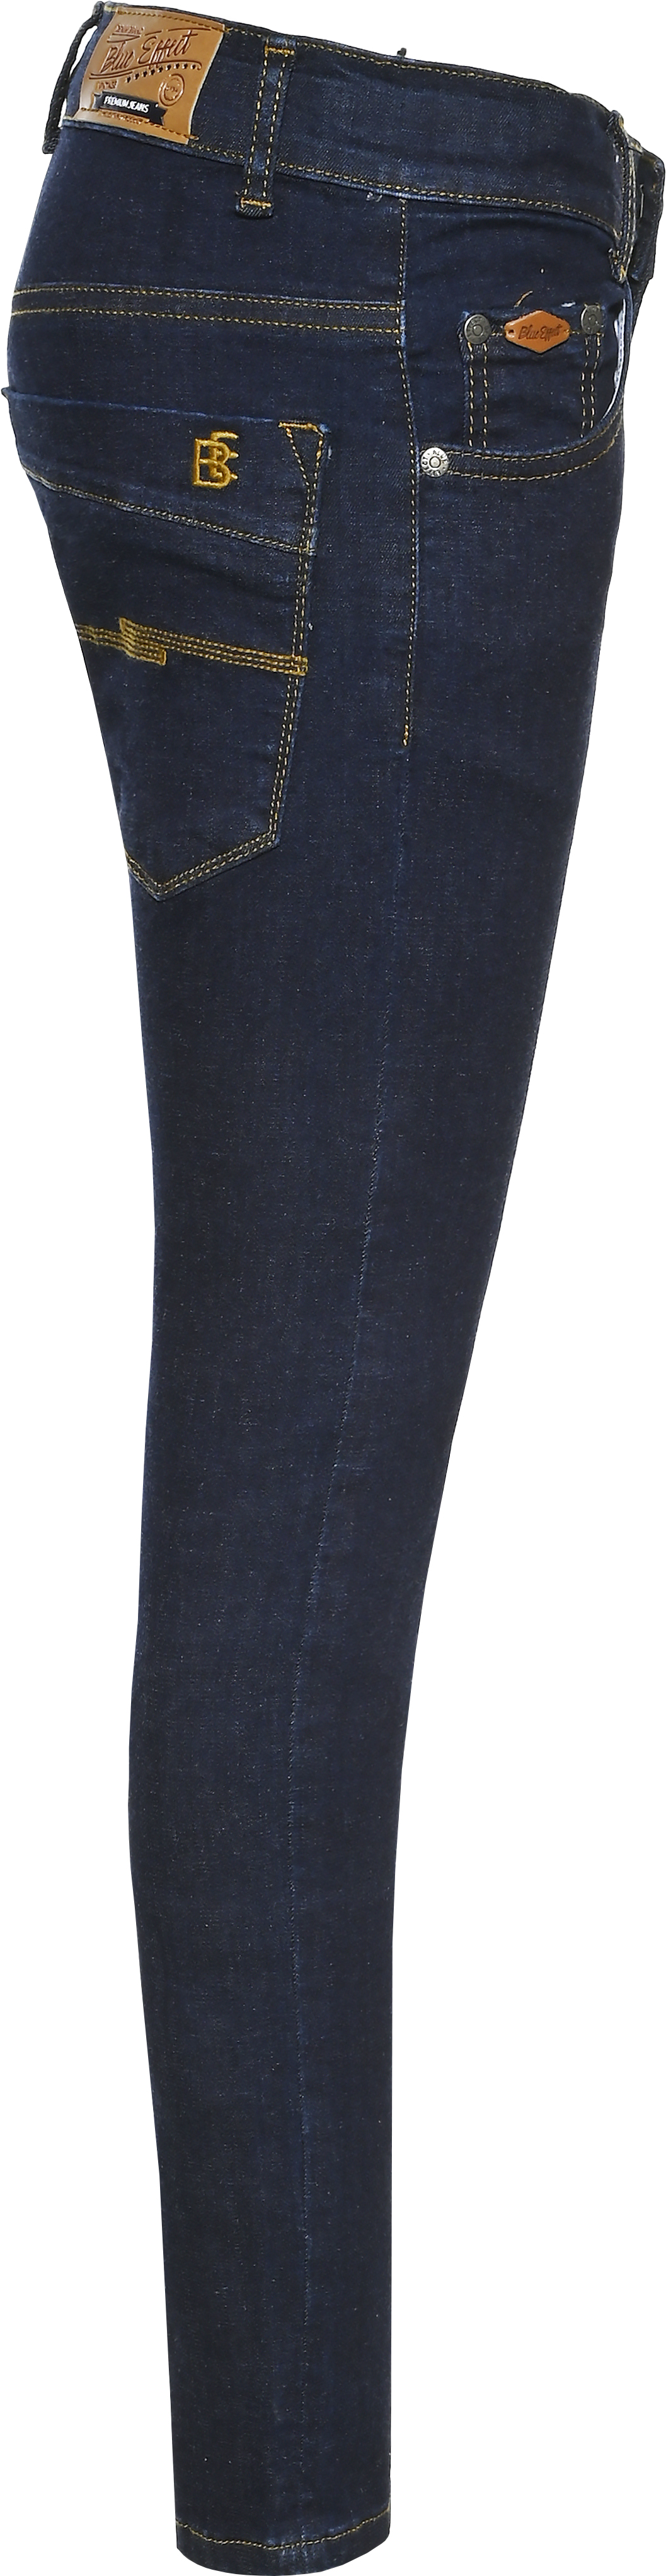 2825-Boys Special Skinny Jeans Ultrastretch, available in Slim,Normal,Wide